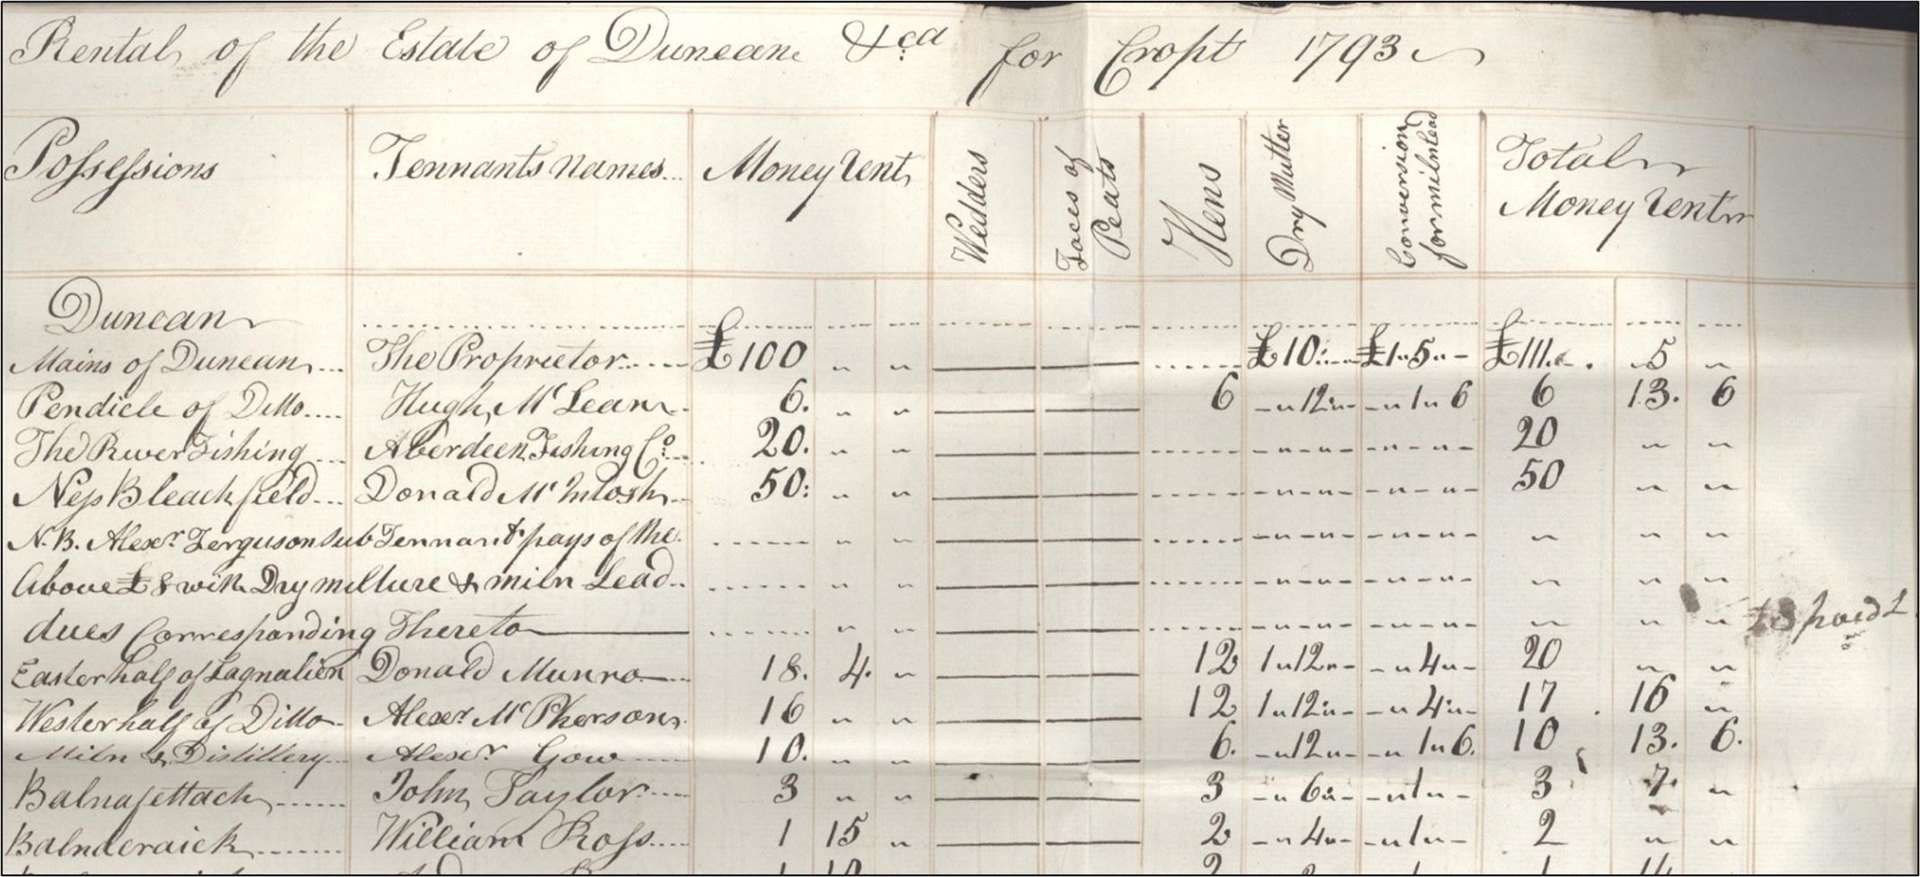 The rental roll of the Estate of Dunain, 1793.